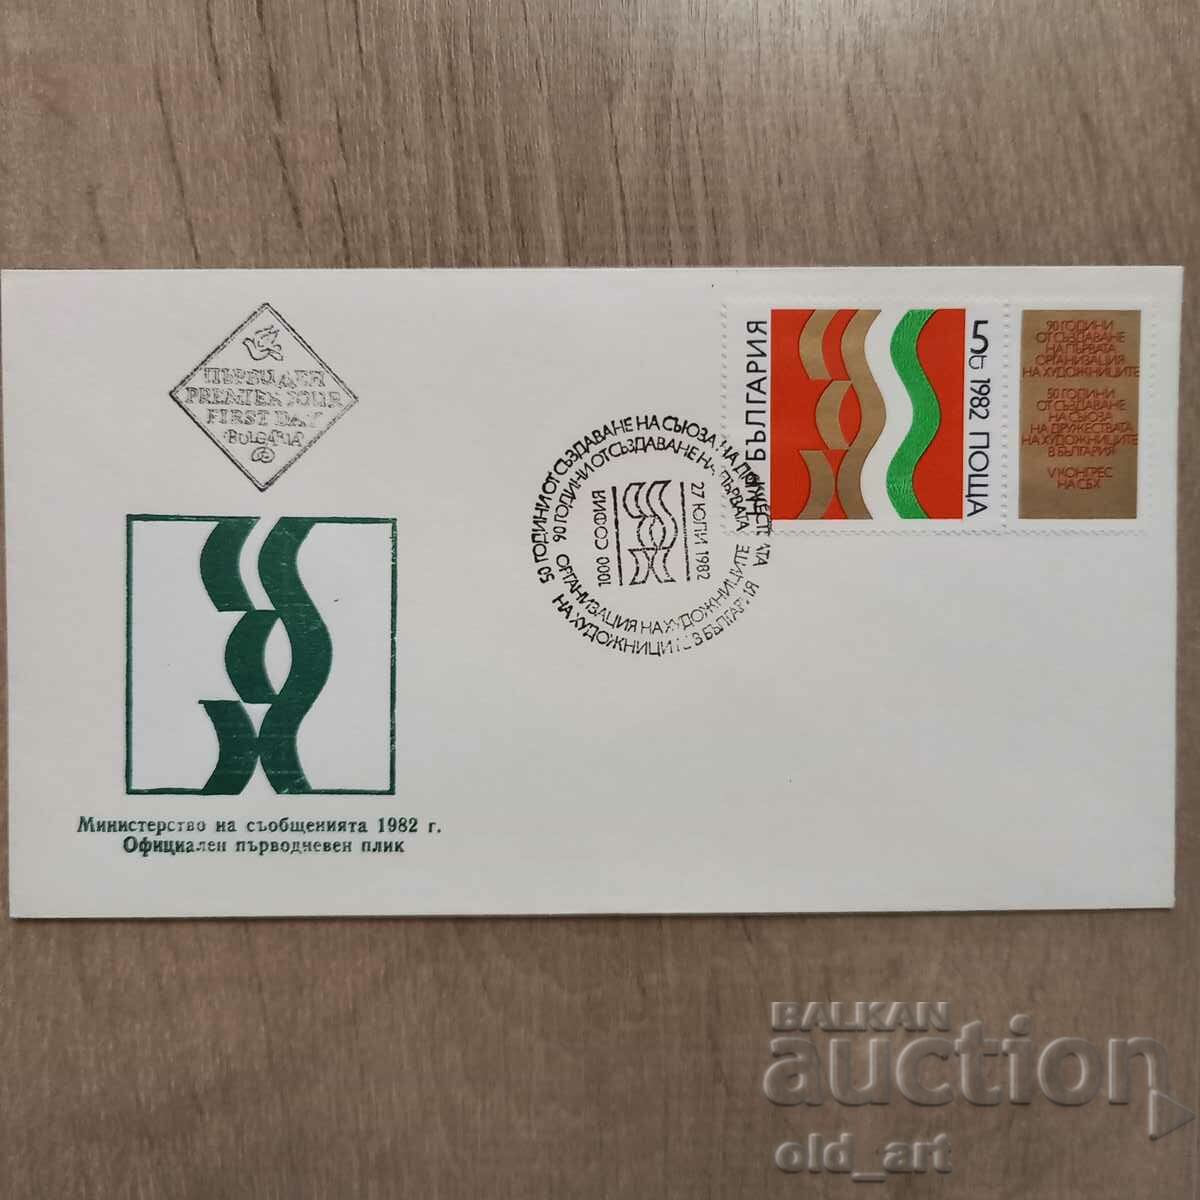 Postal envelope - 90 years since the creation of the first organization of artists